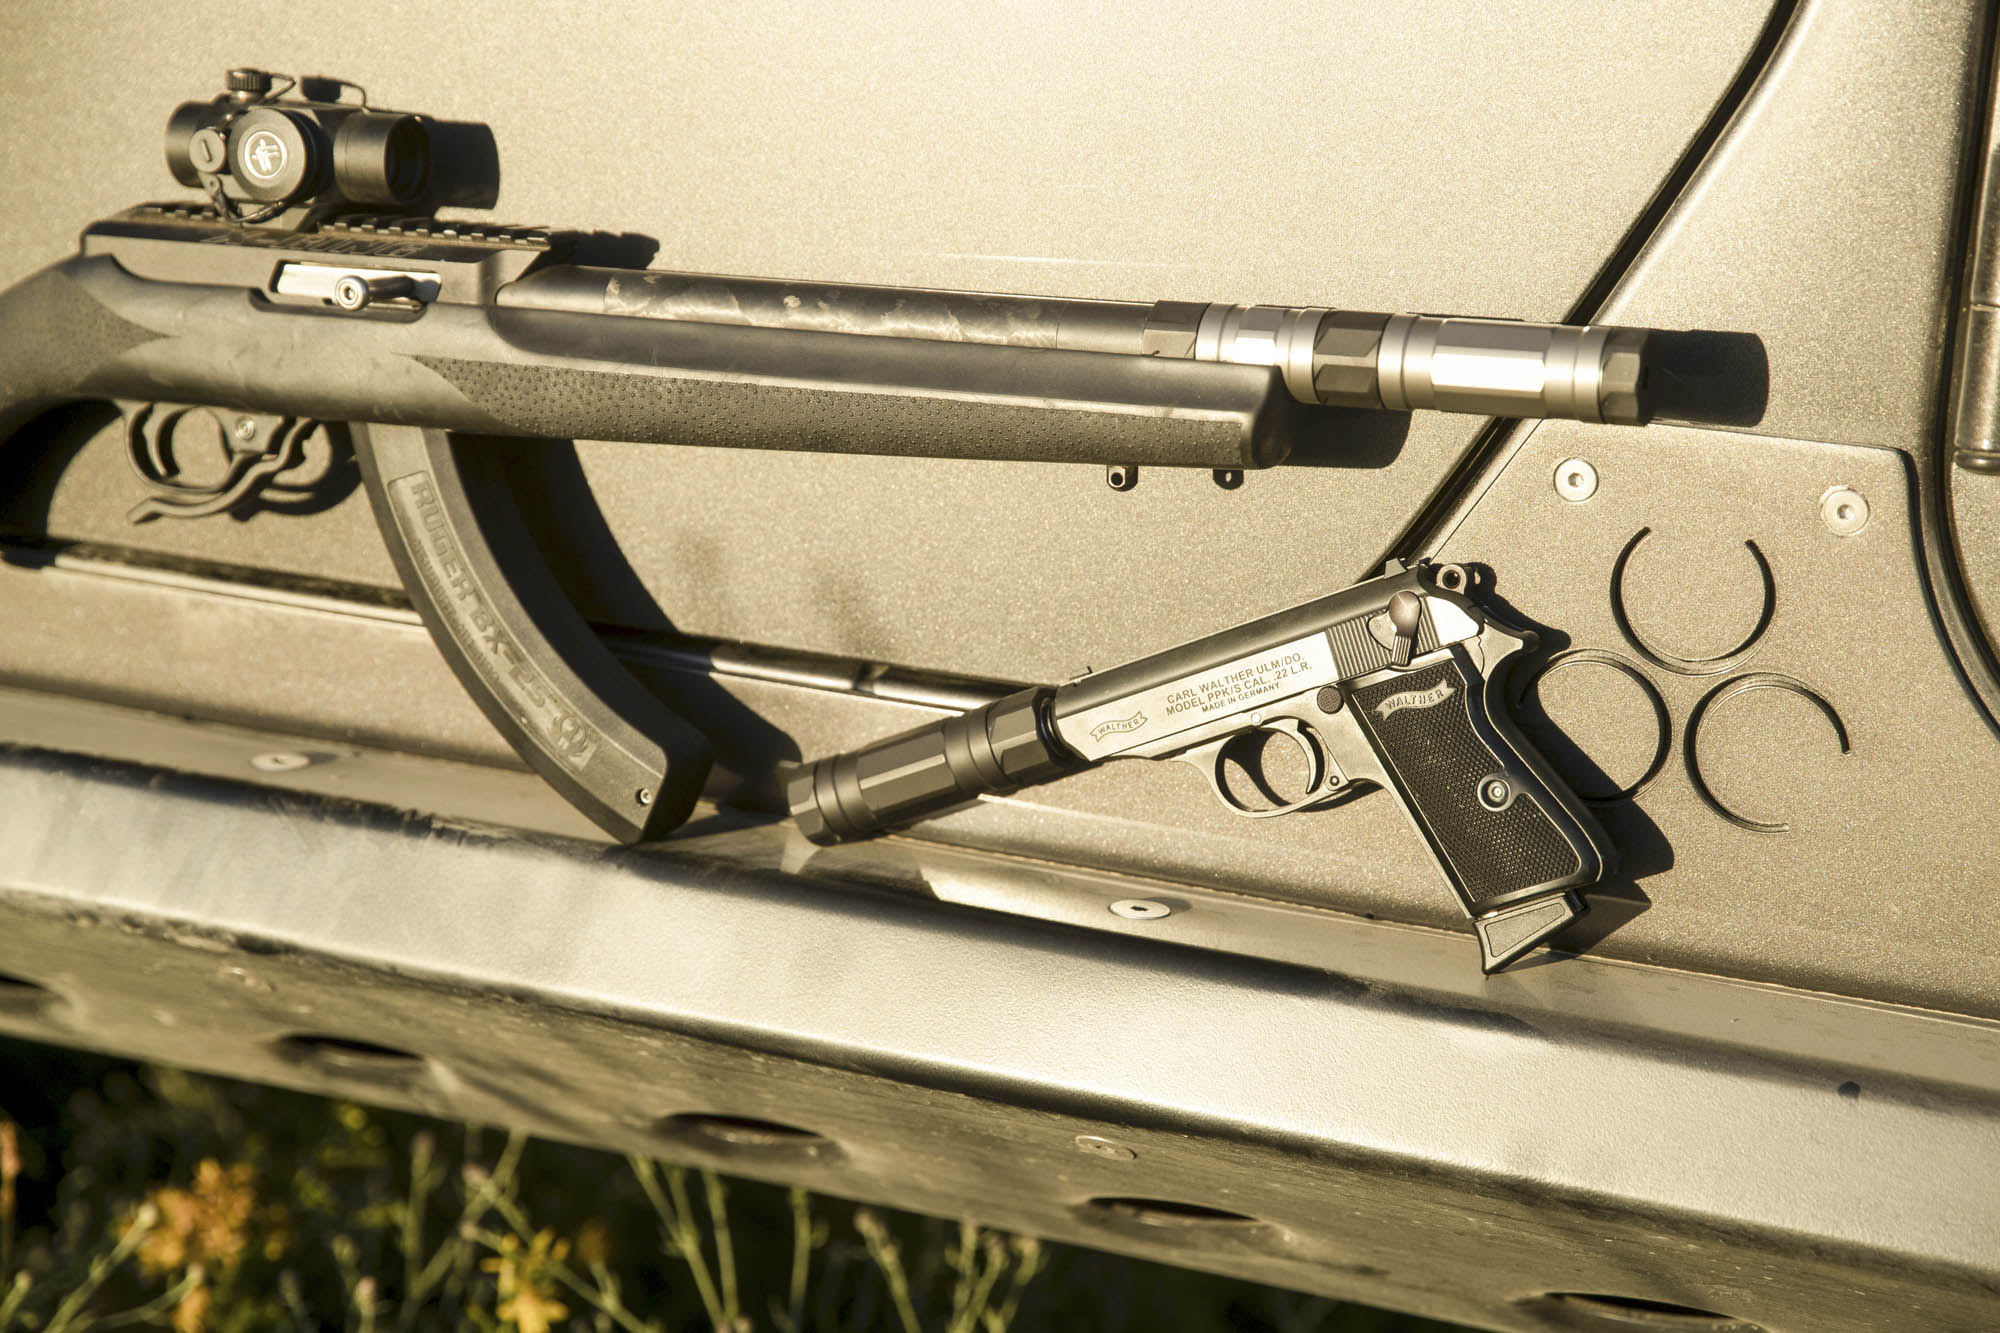 108dB? Meet the New SilencerCo Switchback 22 RECOIL